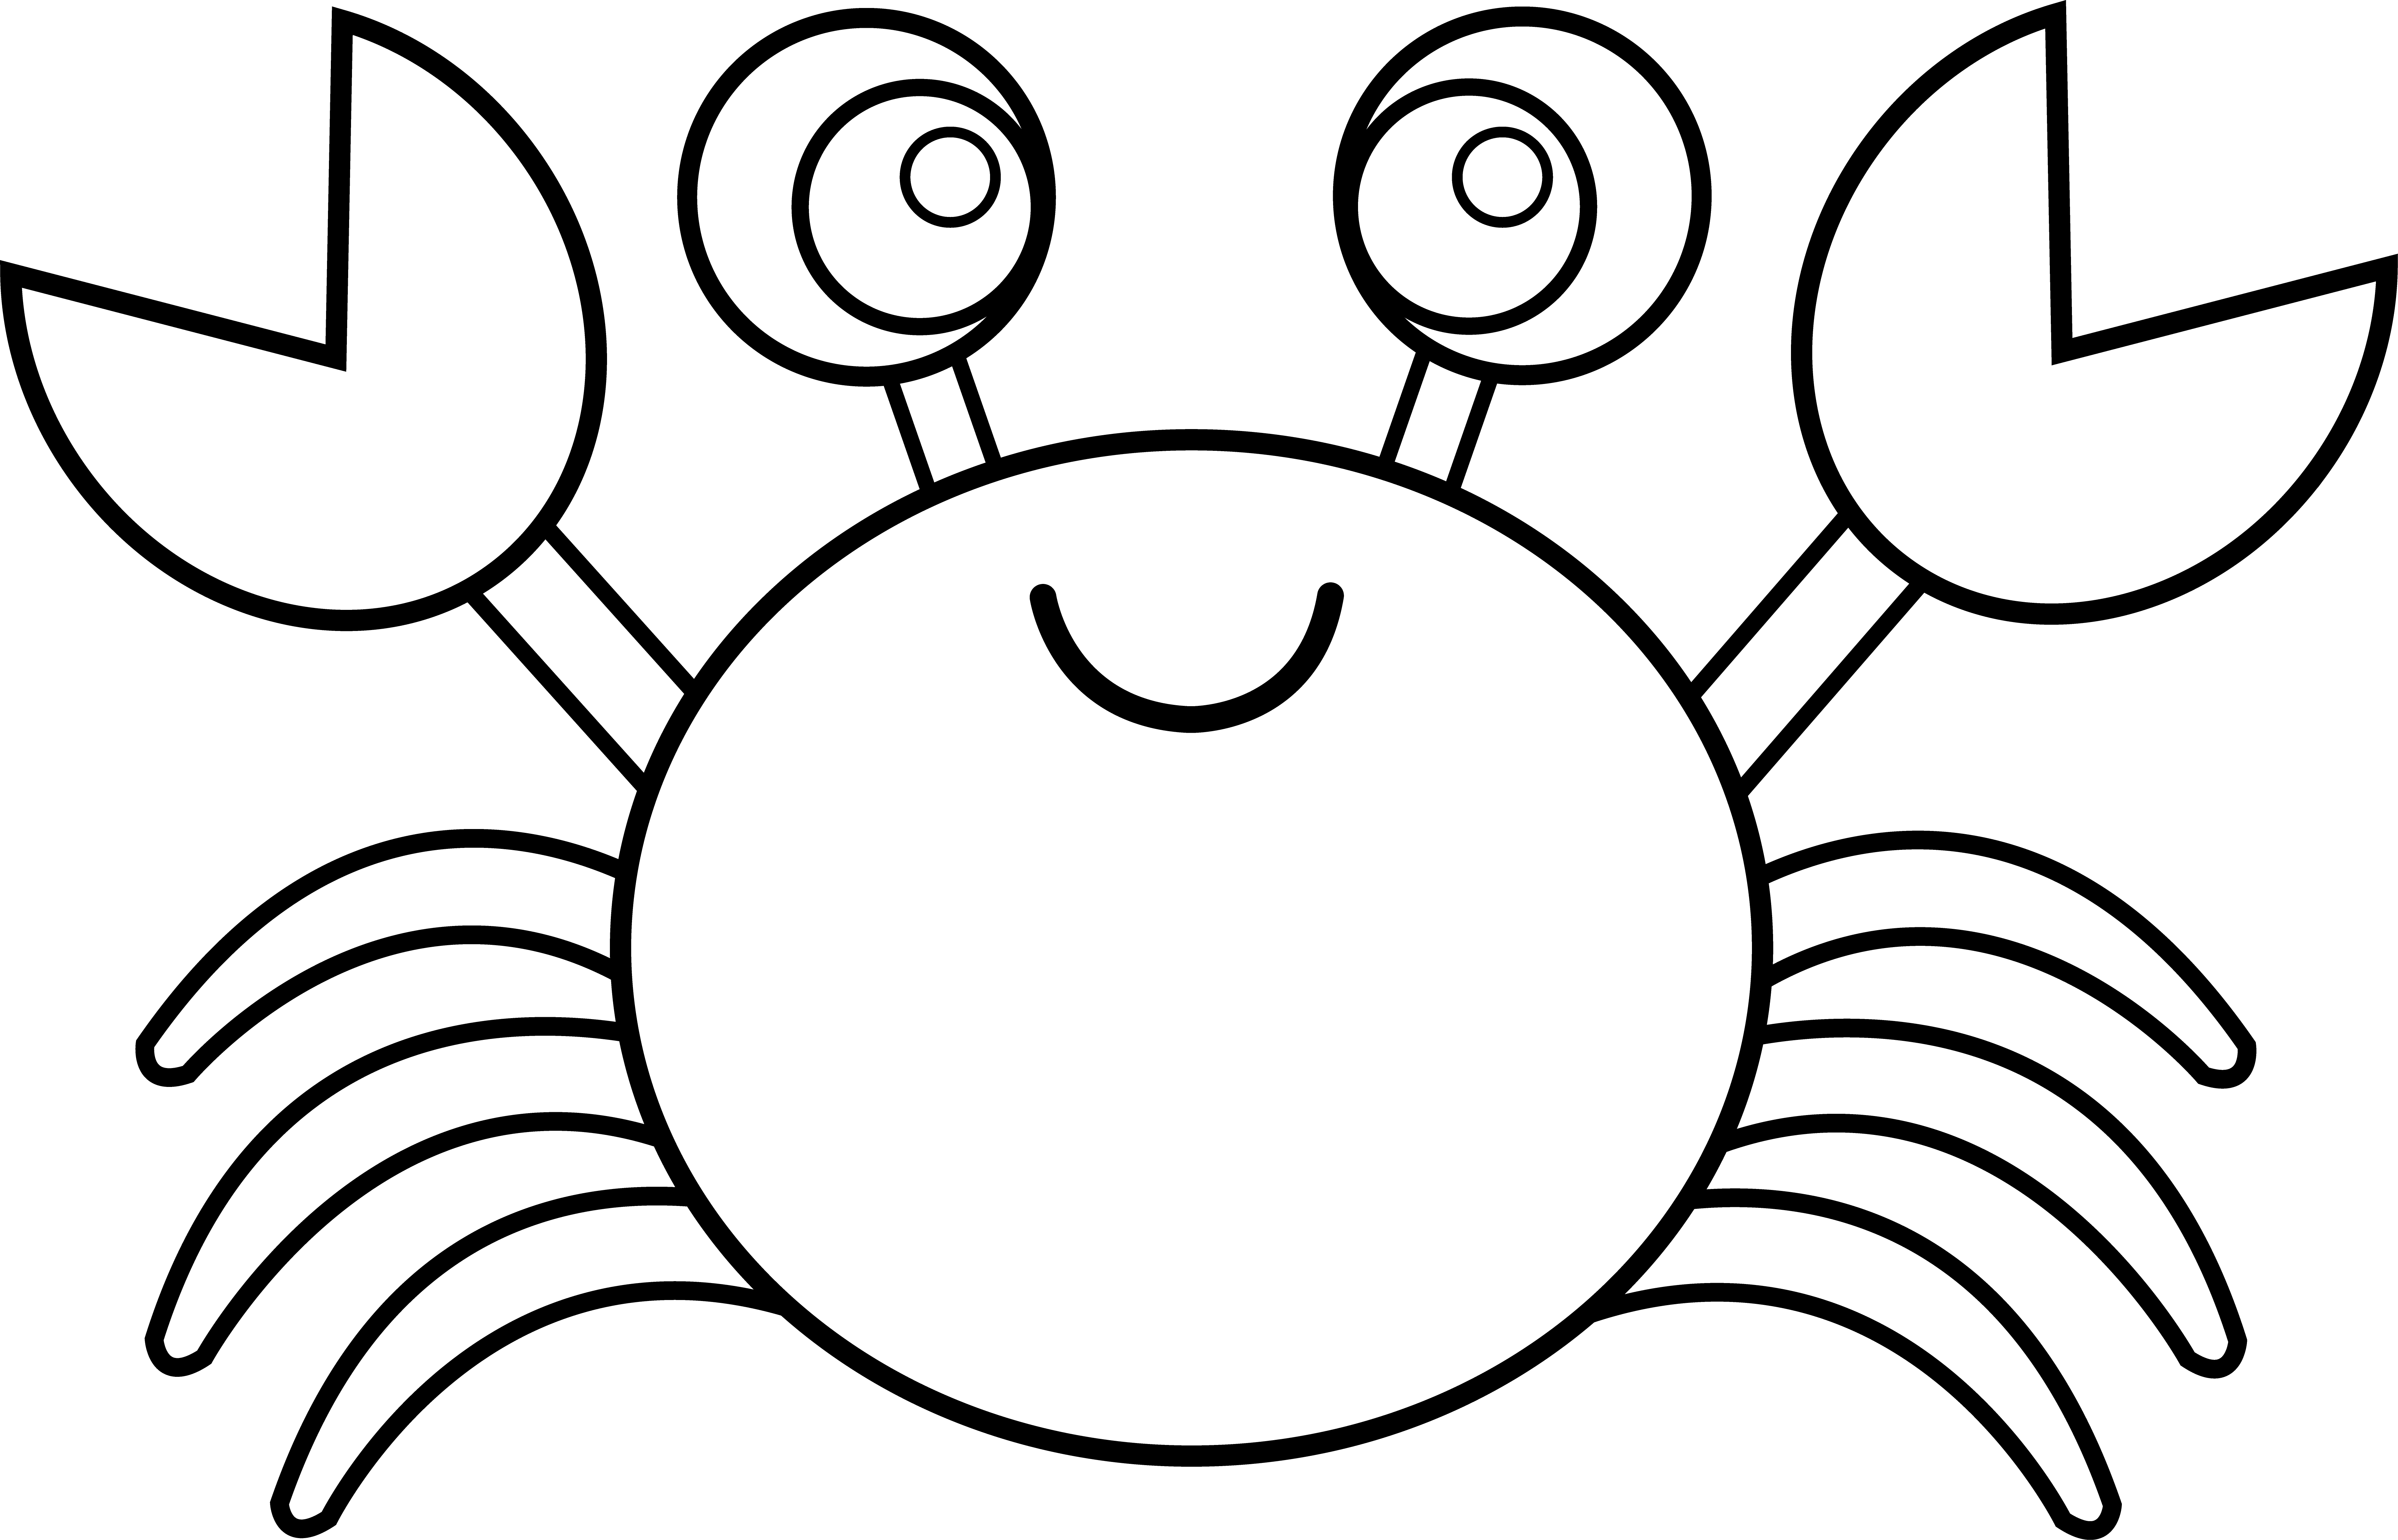 Windy clipart clip art. Crab black and white